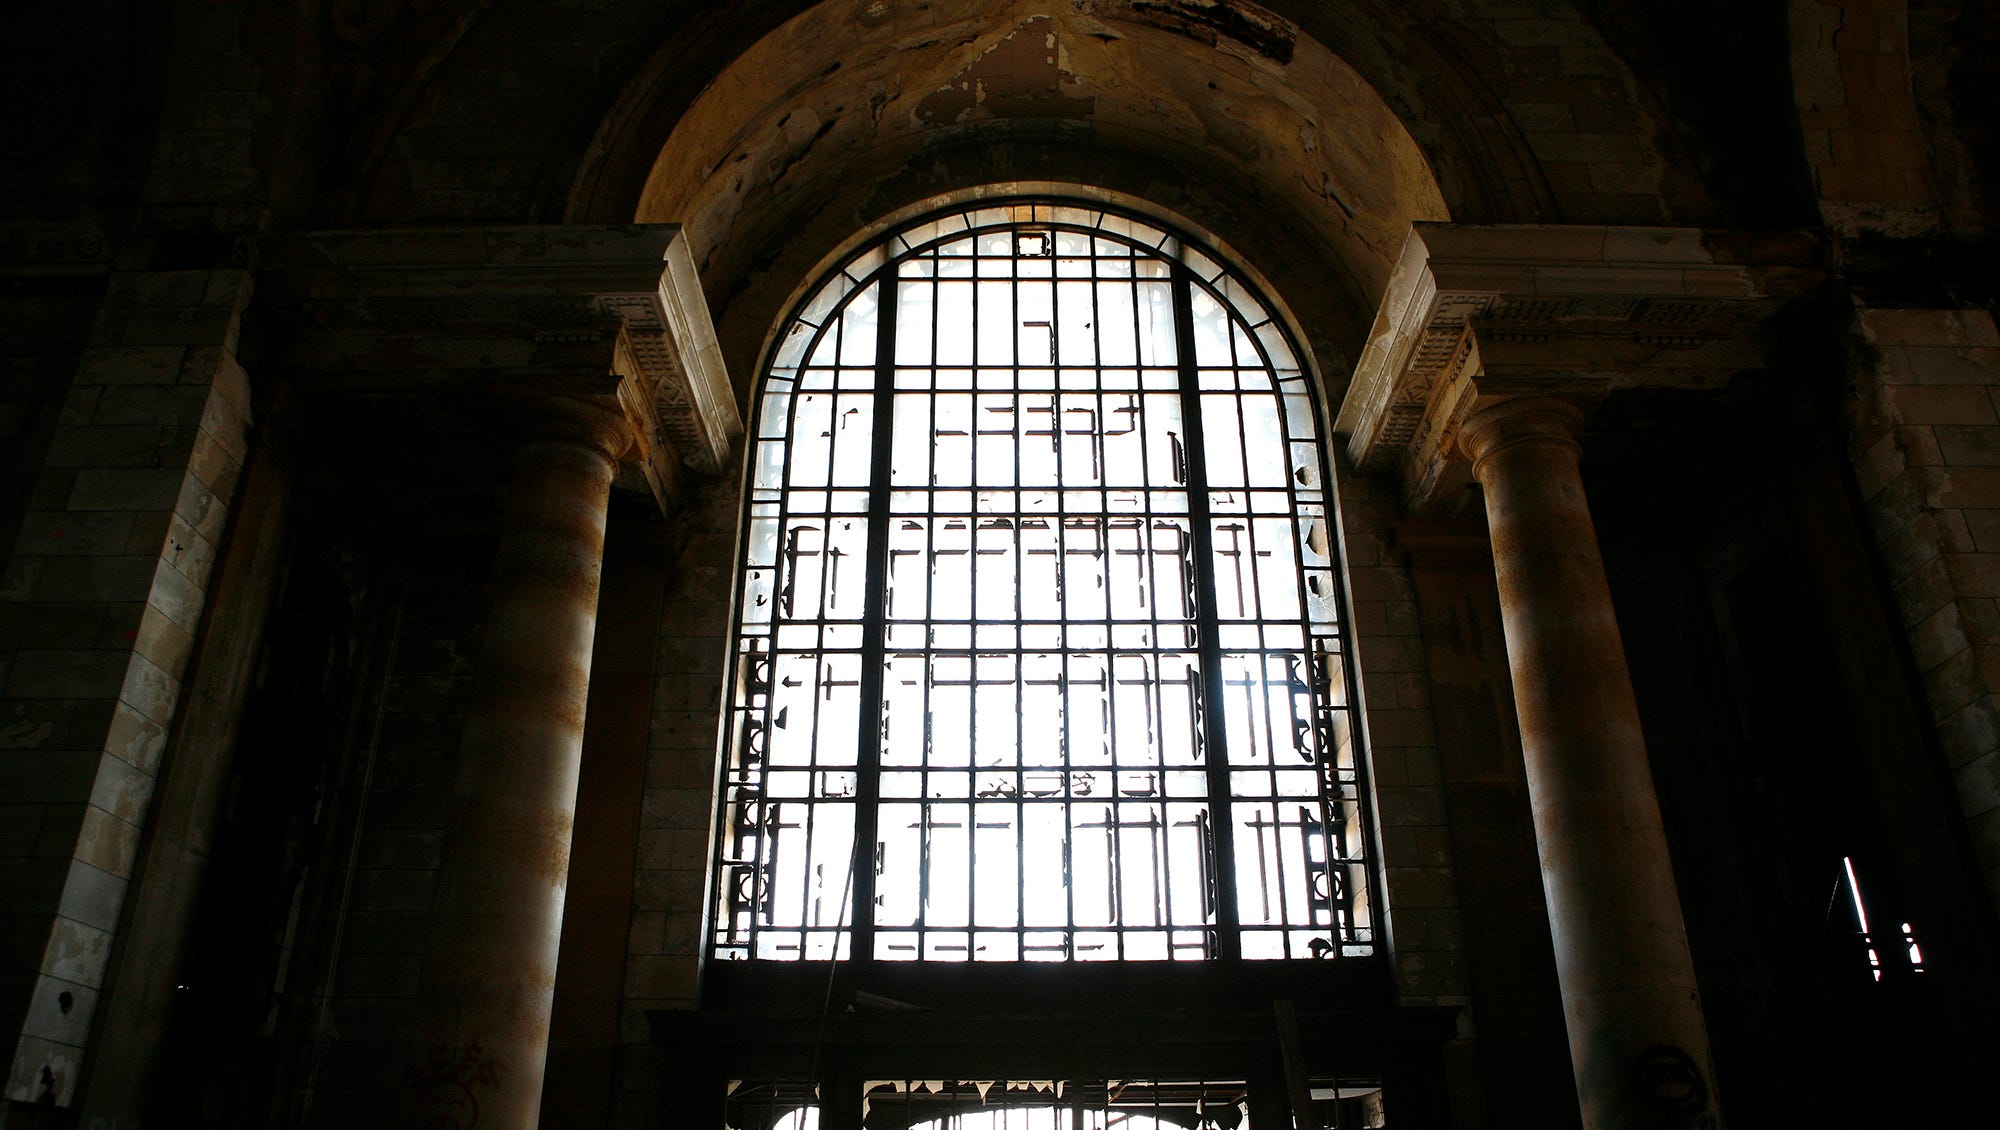 The Michigan Central Depot two-story entrance is seen from inside the depot on April 6, 2008.